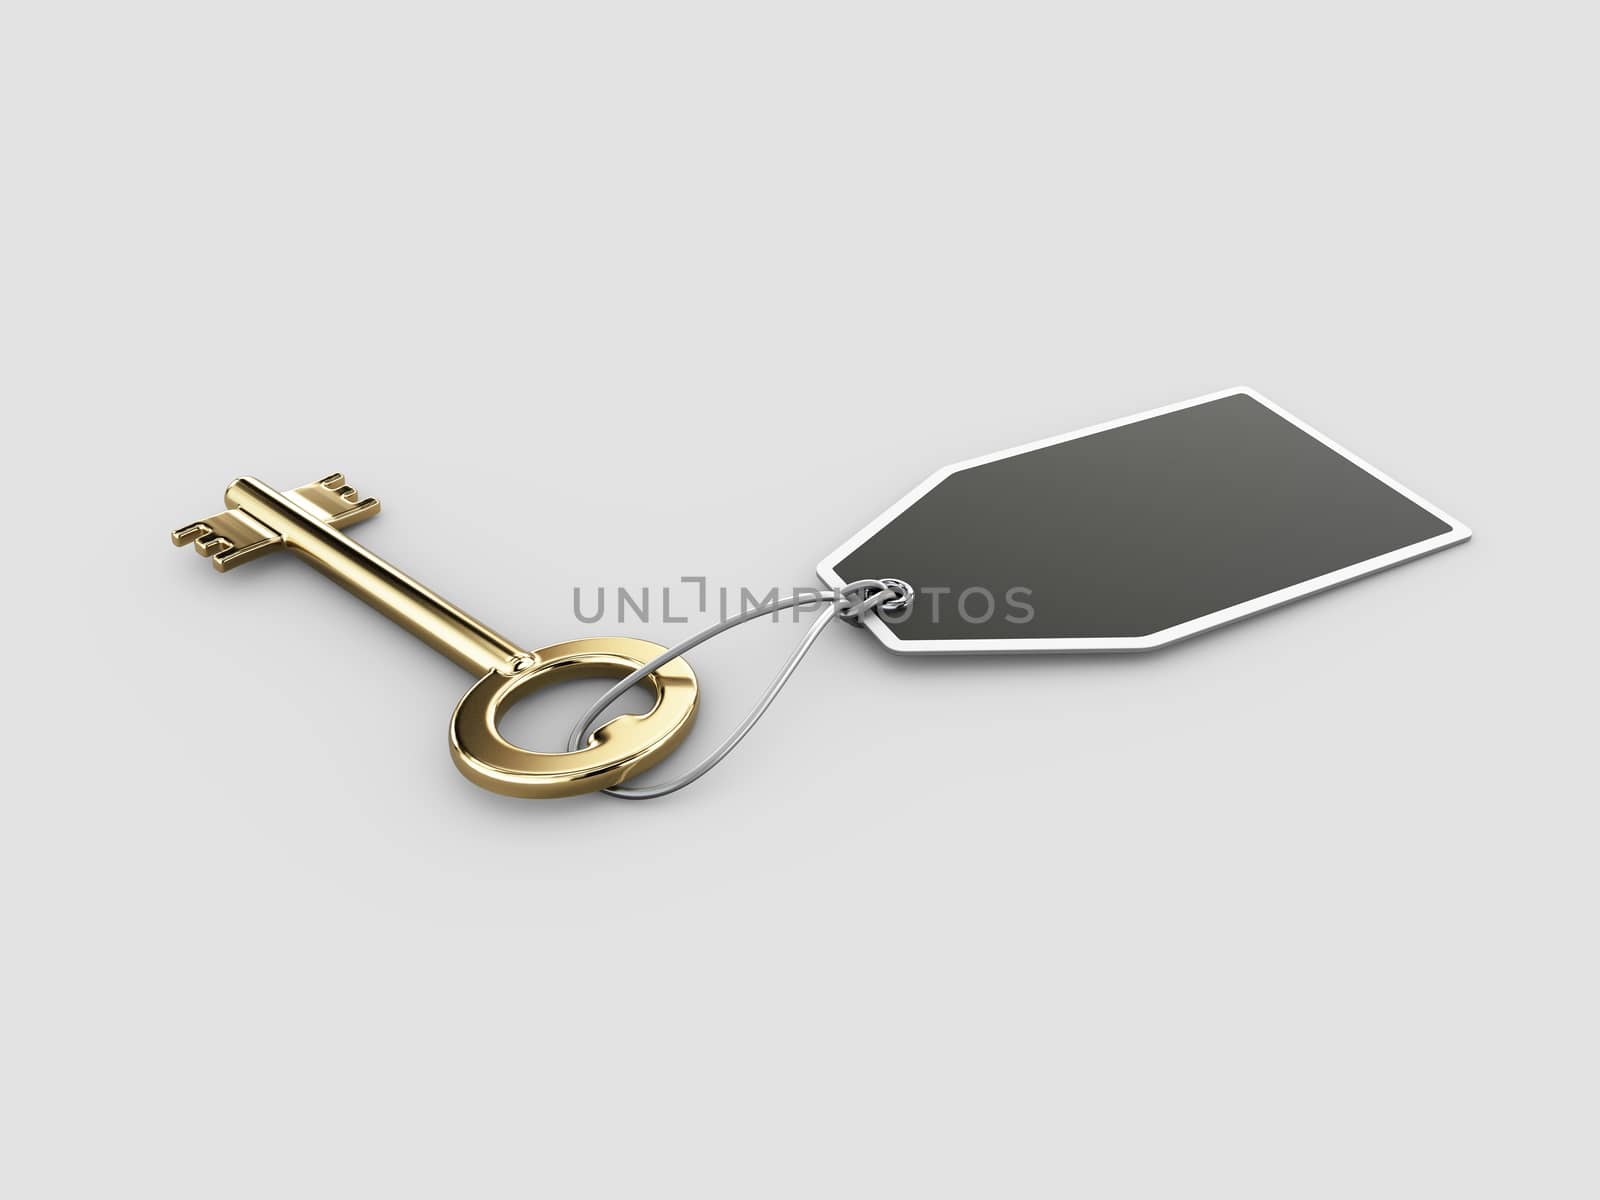 3d rendering of Keys with label, clipping path included.